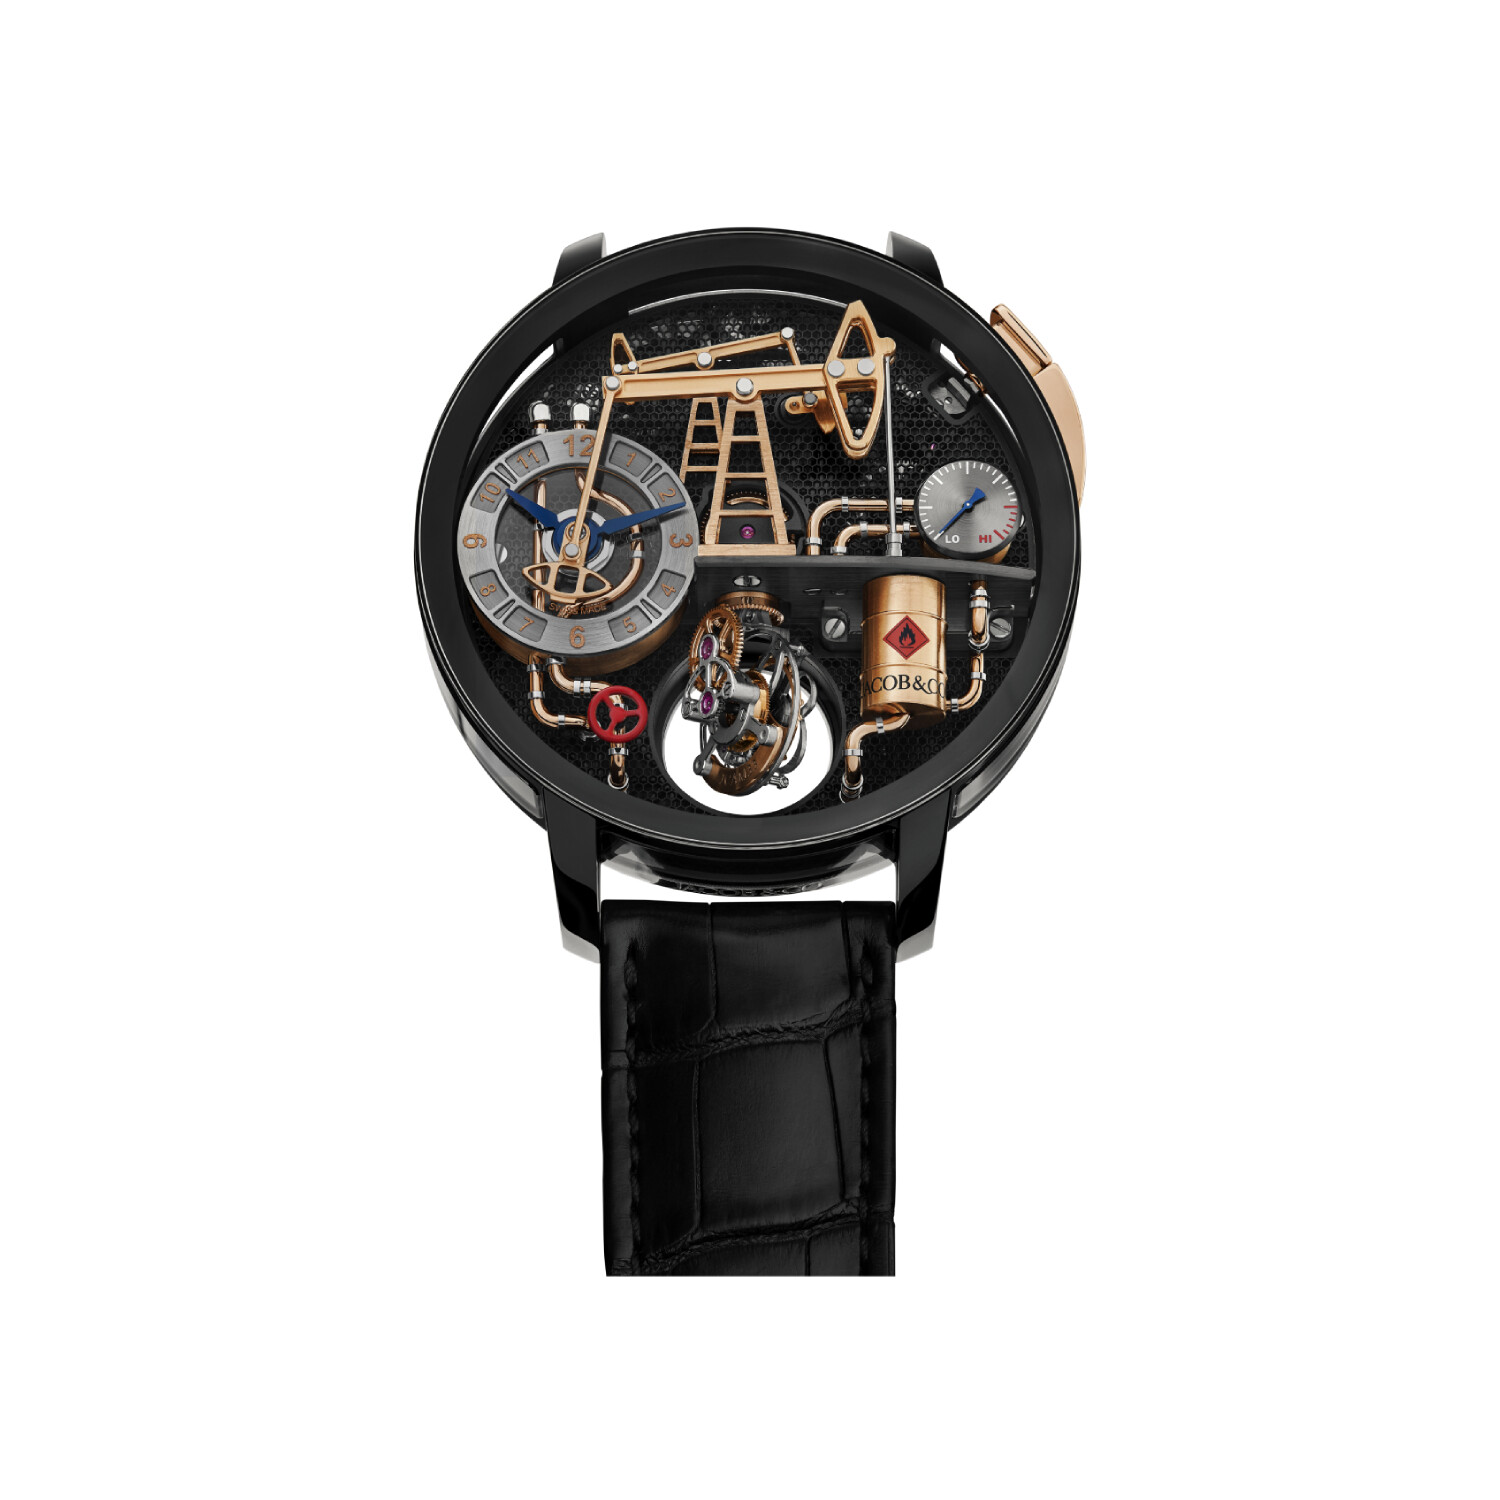 The Jacob & Co. Oil Pump Watch • The MAN